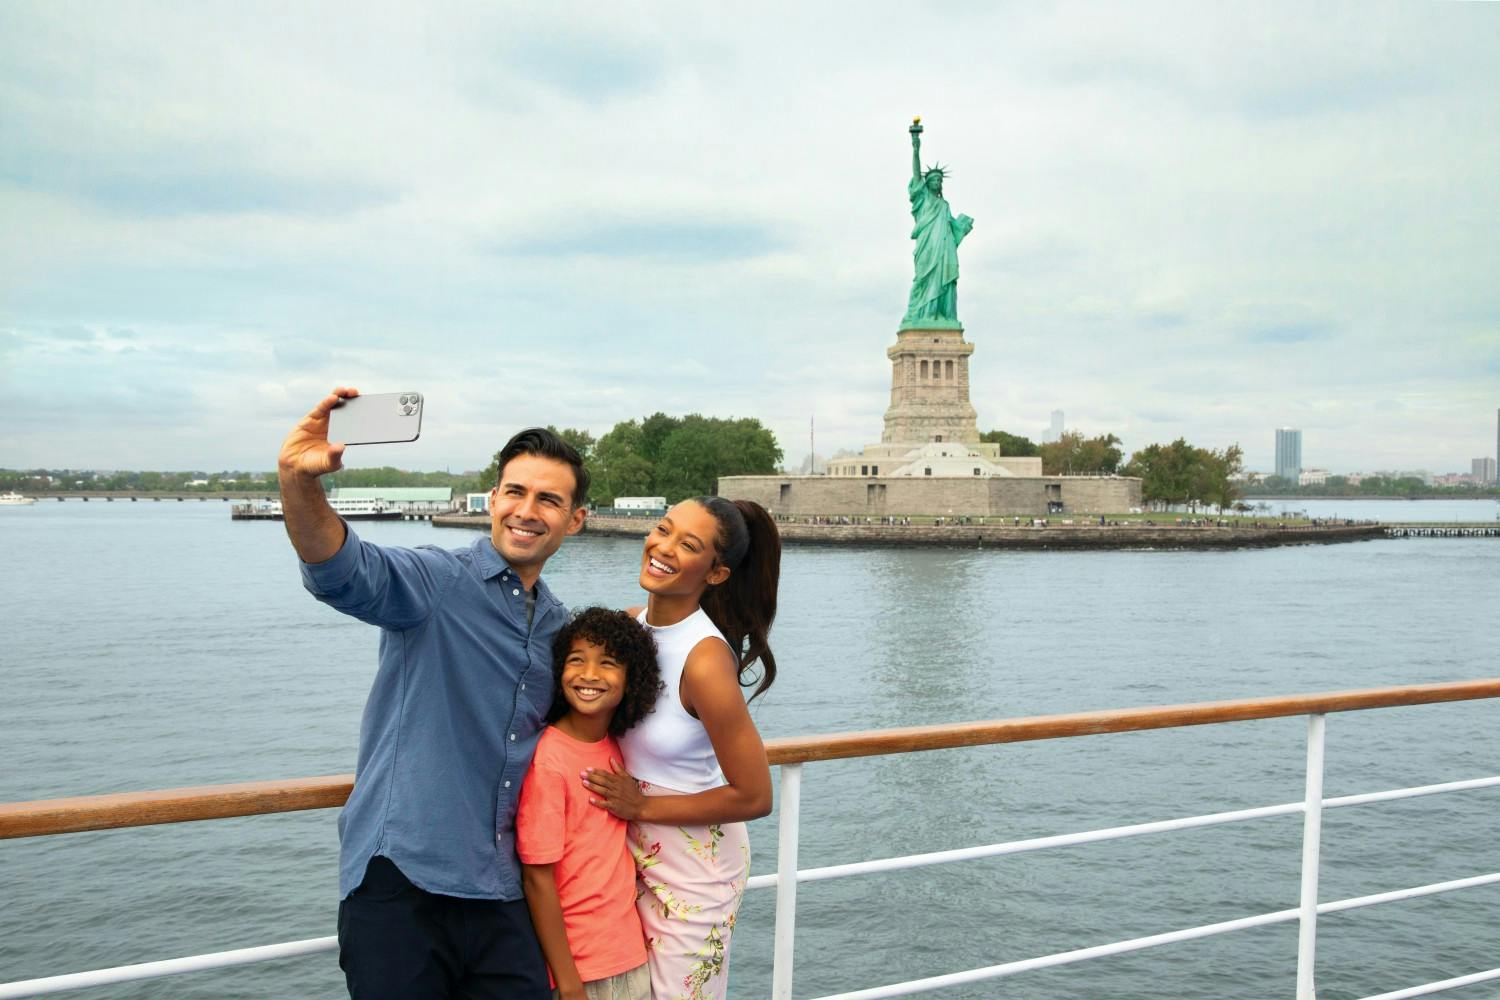 05_Statue_of_Liberty_Family_Statue_0114-2_RETOUCHED_3.jpg